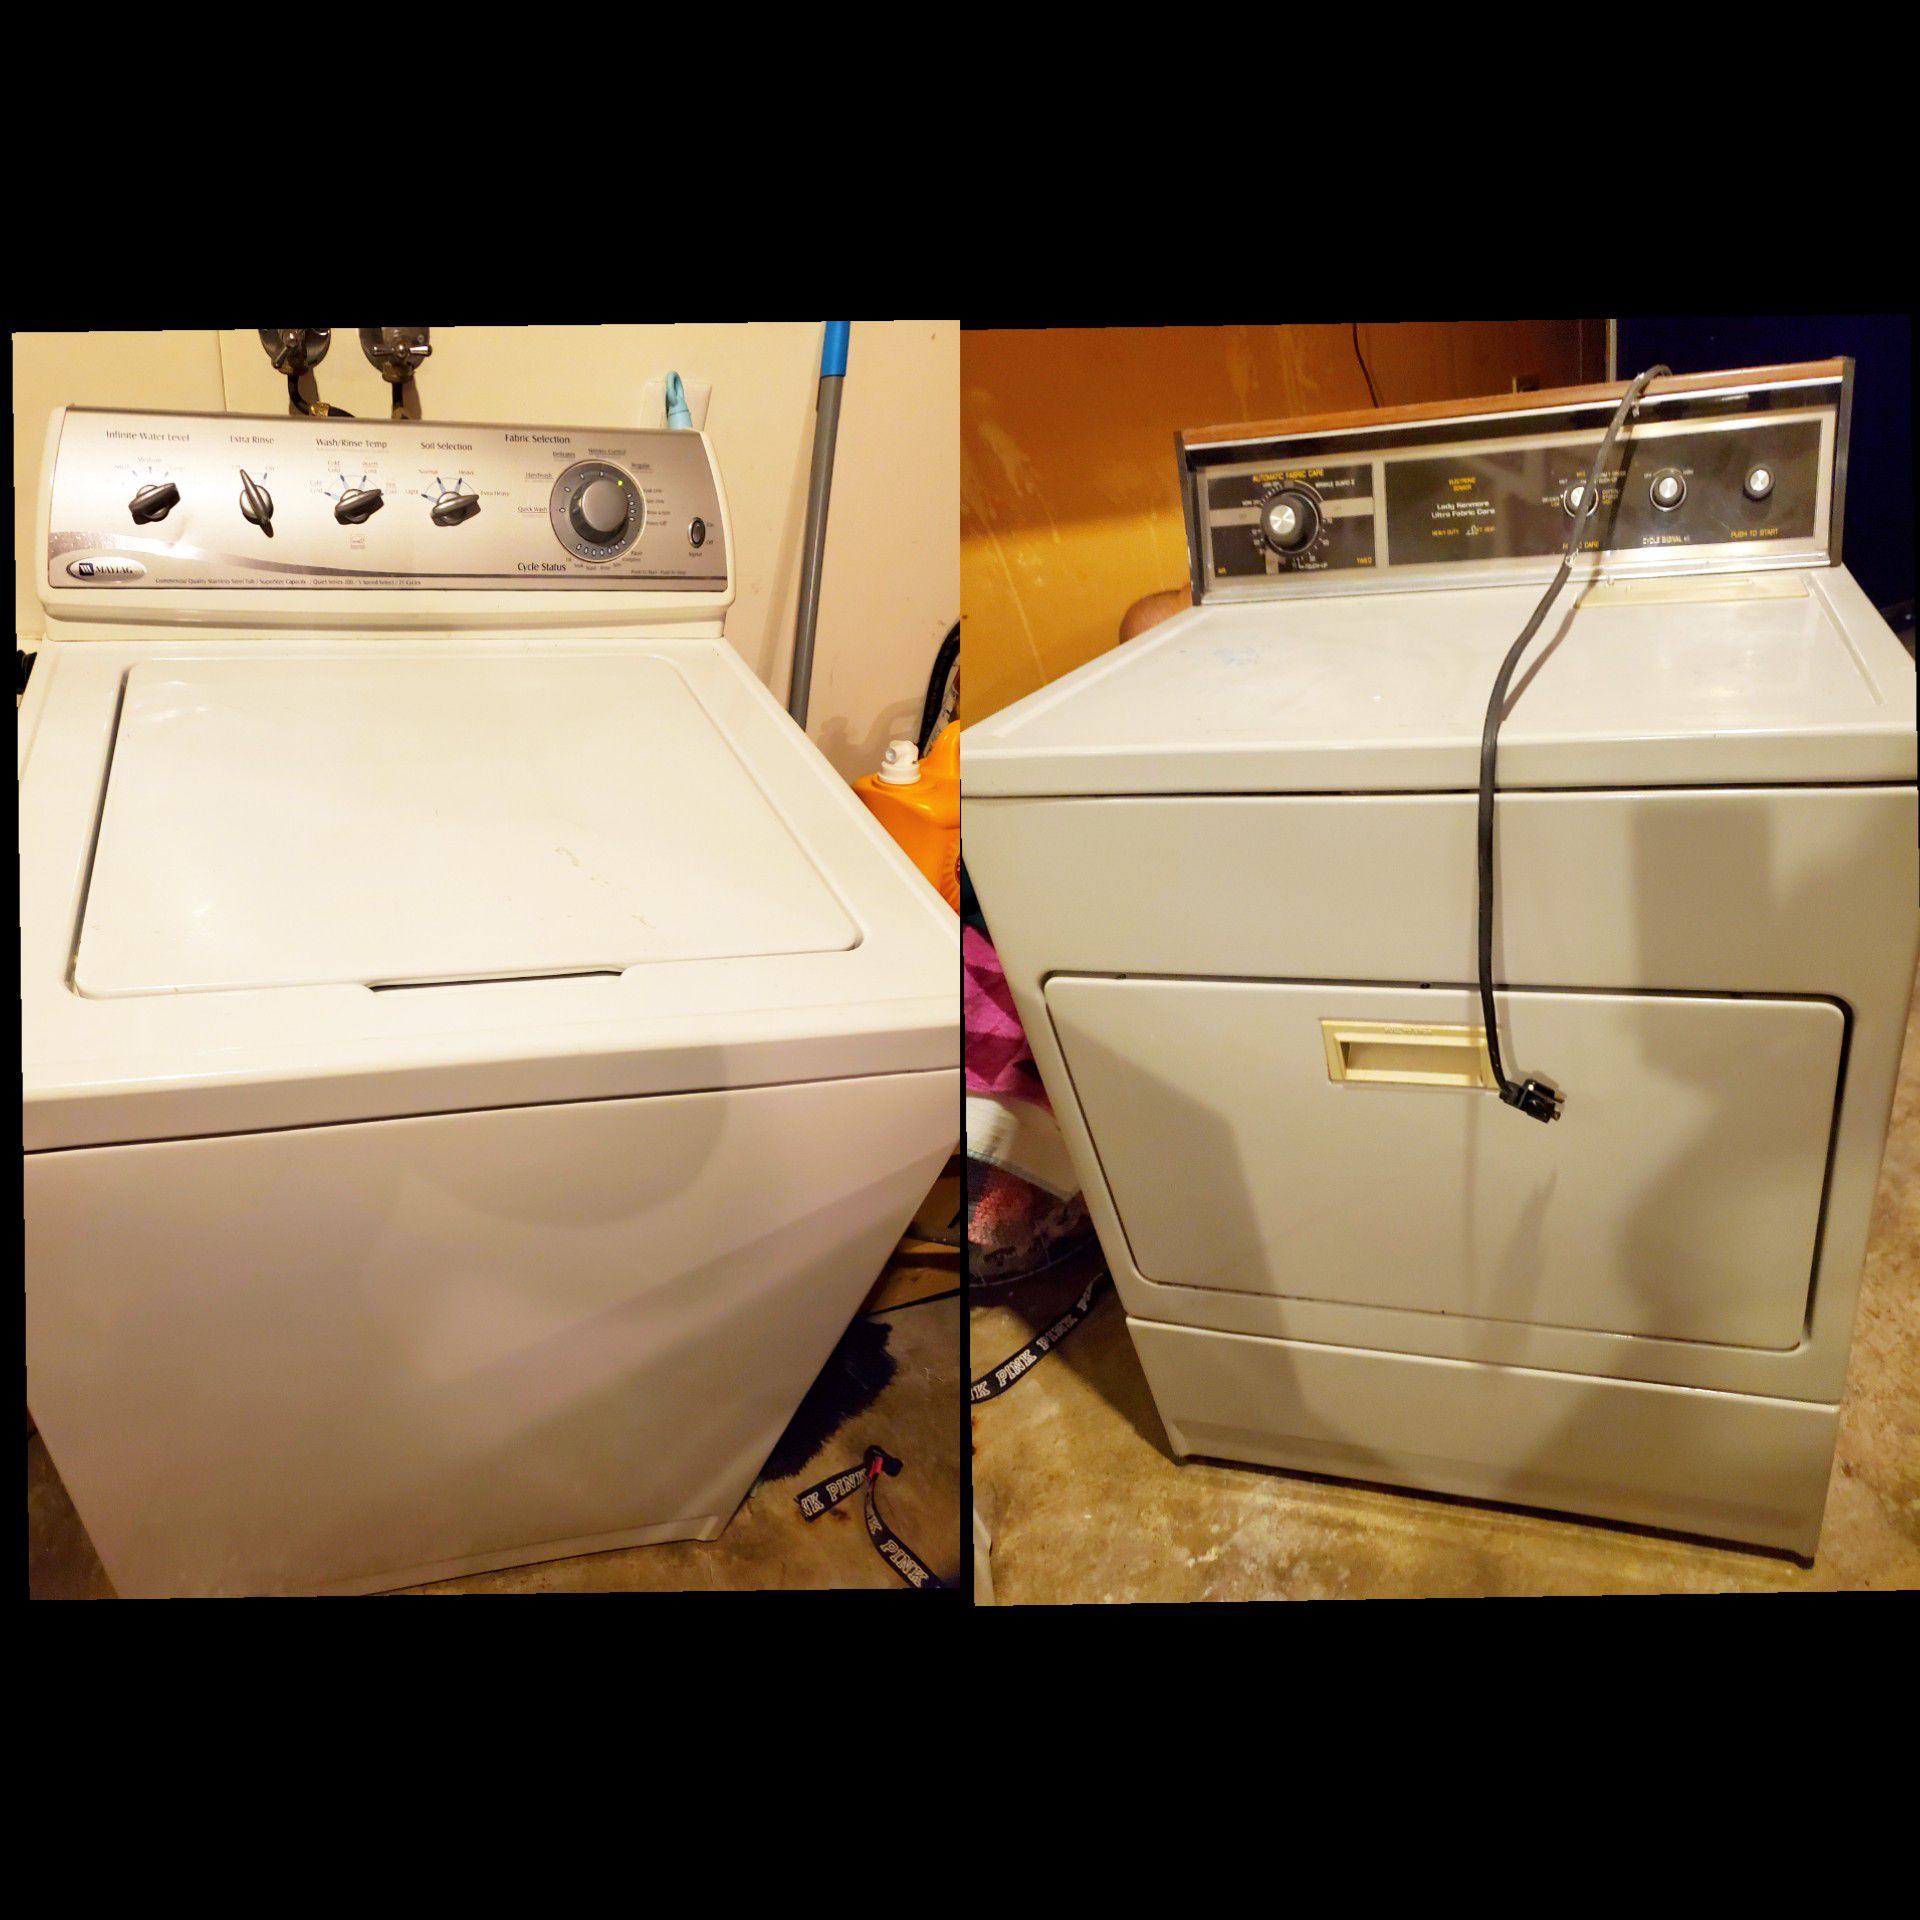 ☆Washer with Gas Dryer☆